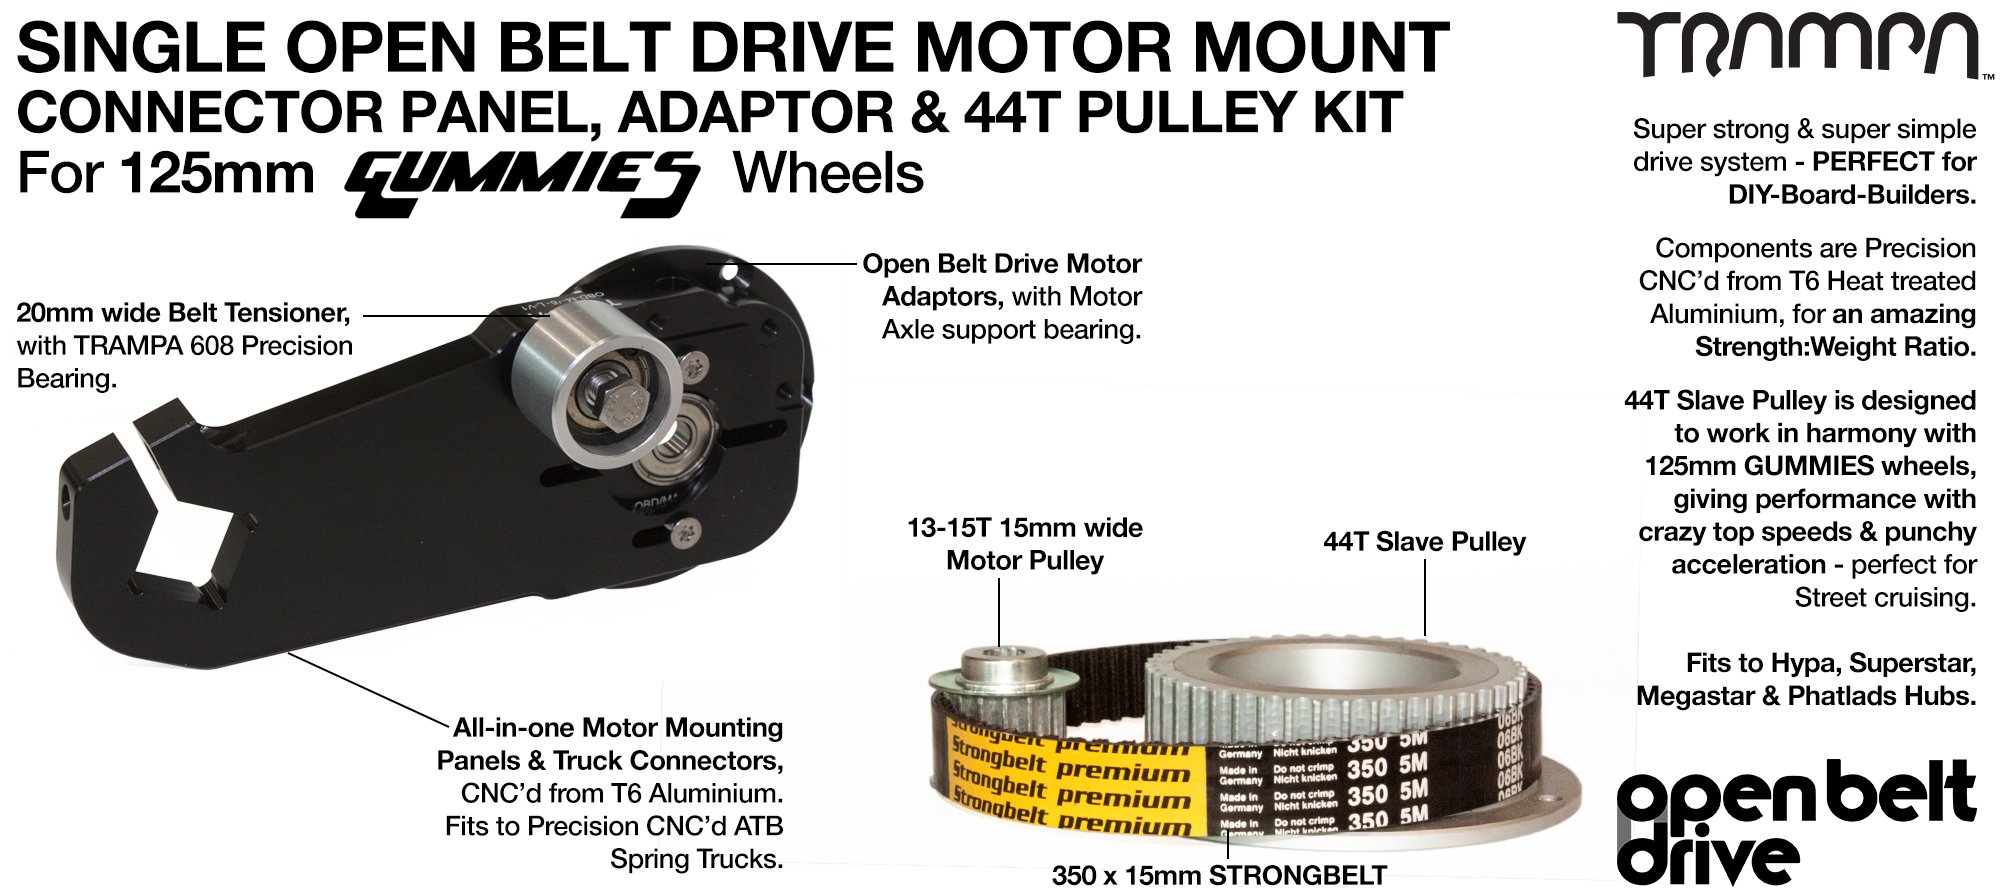 66T OBD Motor Mount & 44 tooth Pulley for GUMMY Wheels - SINGLE